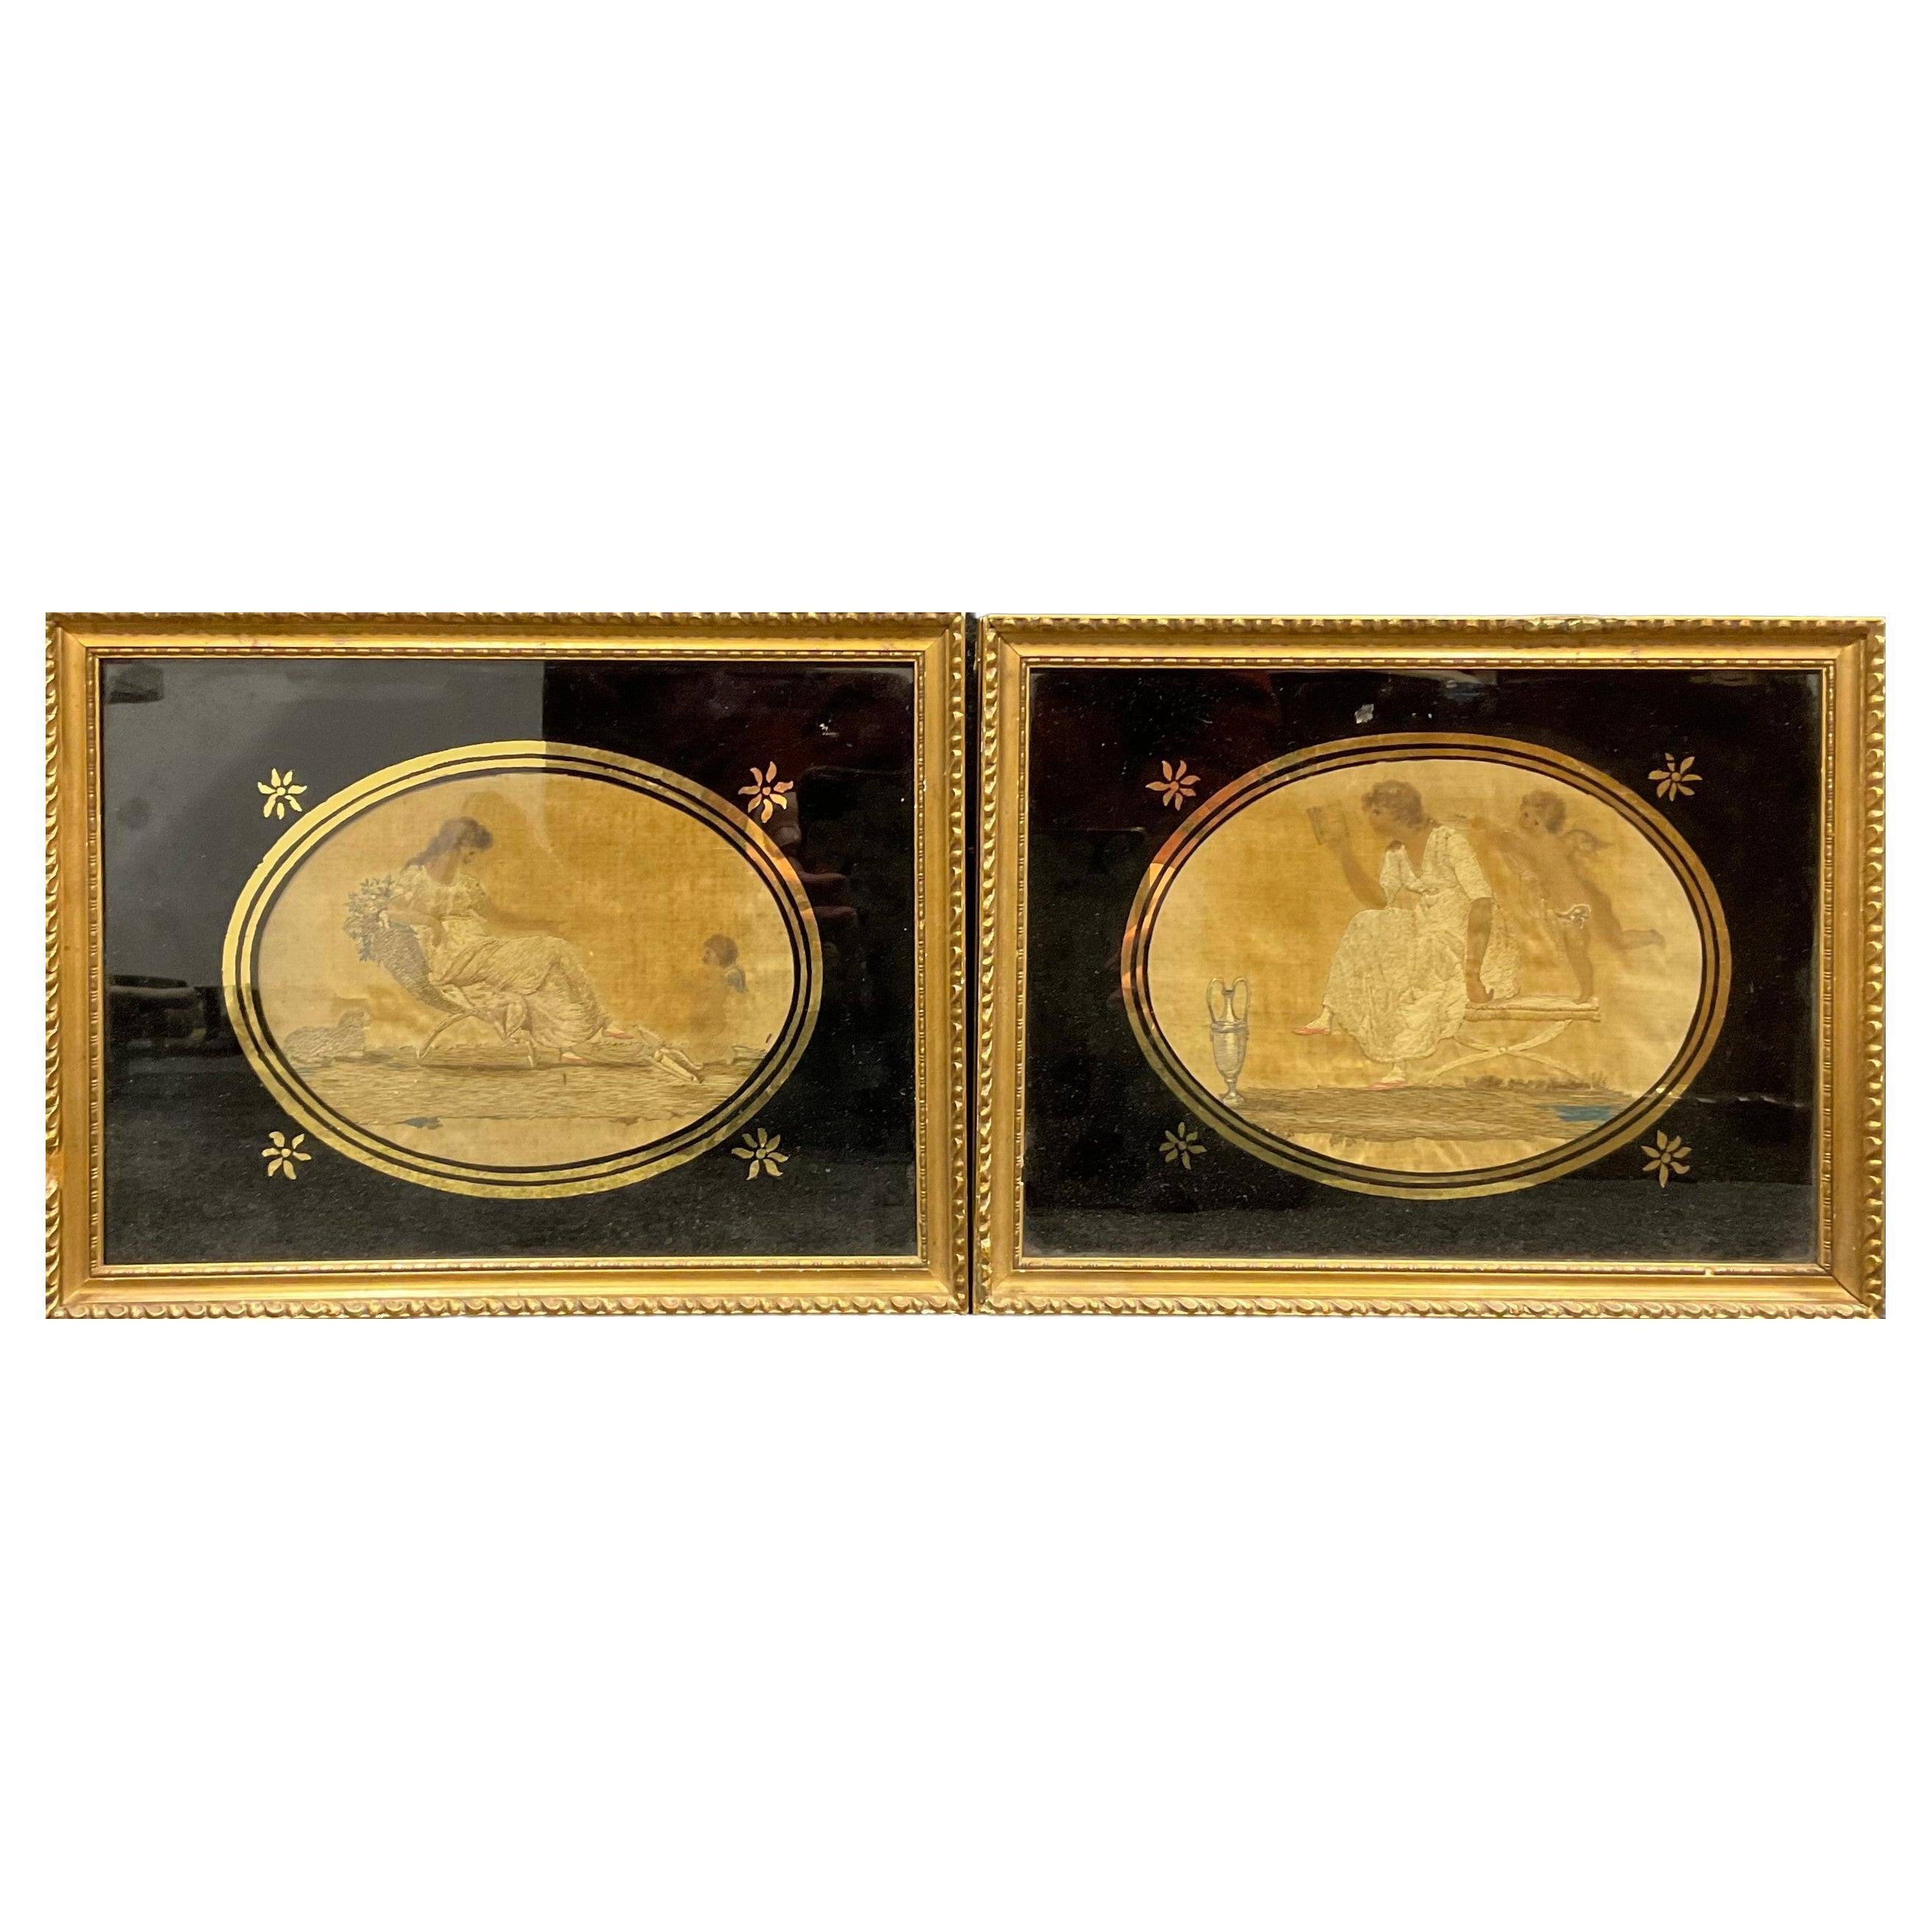 Pair of George III Glomyized Glass Mythological Silk Pictures of Eros & Psyche 